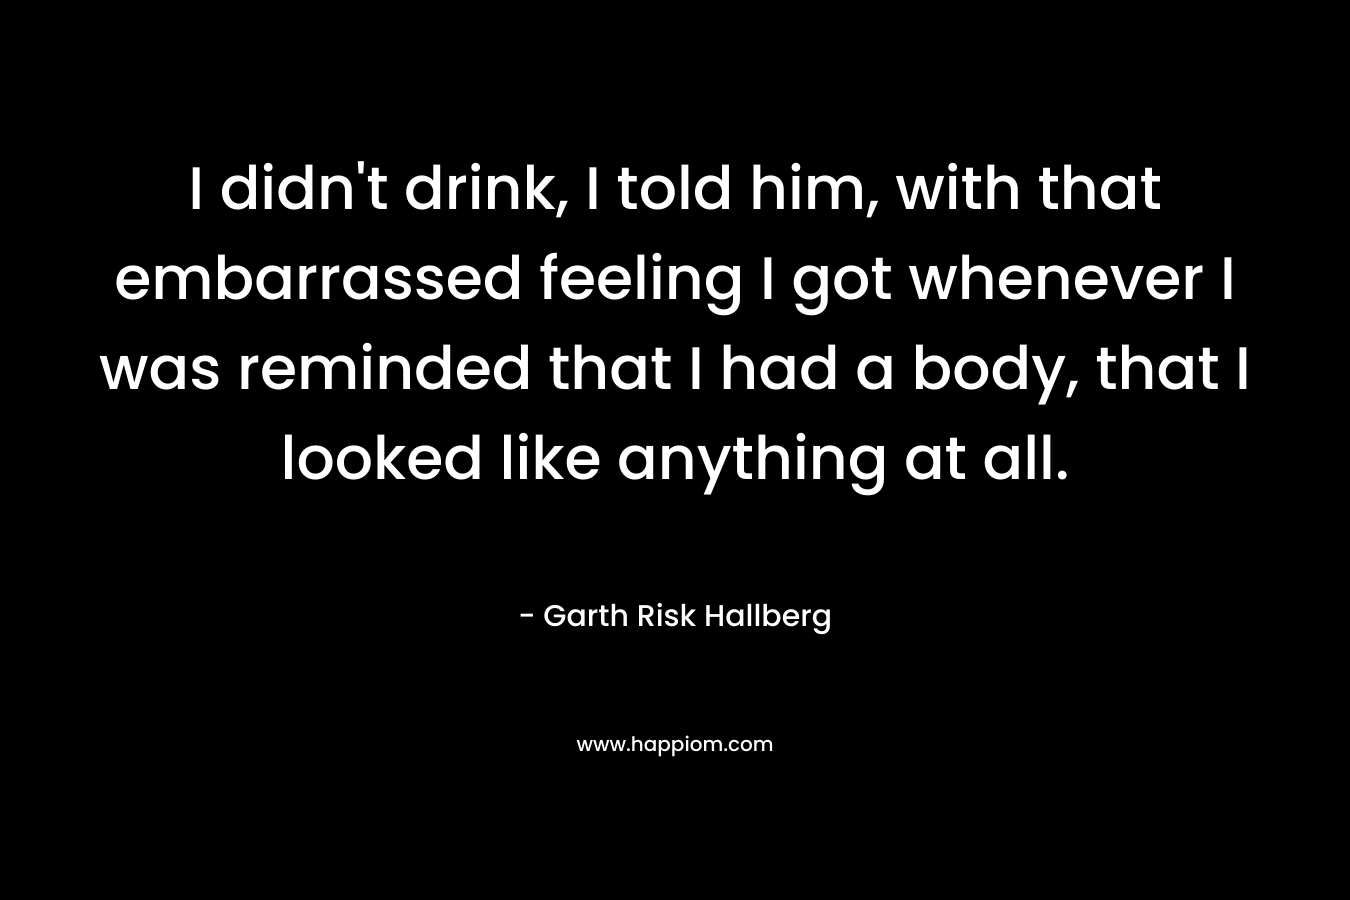 I didn’t drink, I told him, with that embarrassed feeling I got whenever I was reminded that I had a body, that I looked like anything at all. – Garth Risk Hallberg